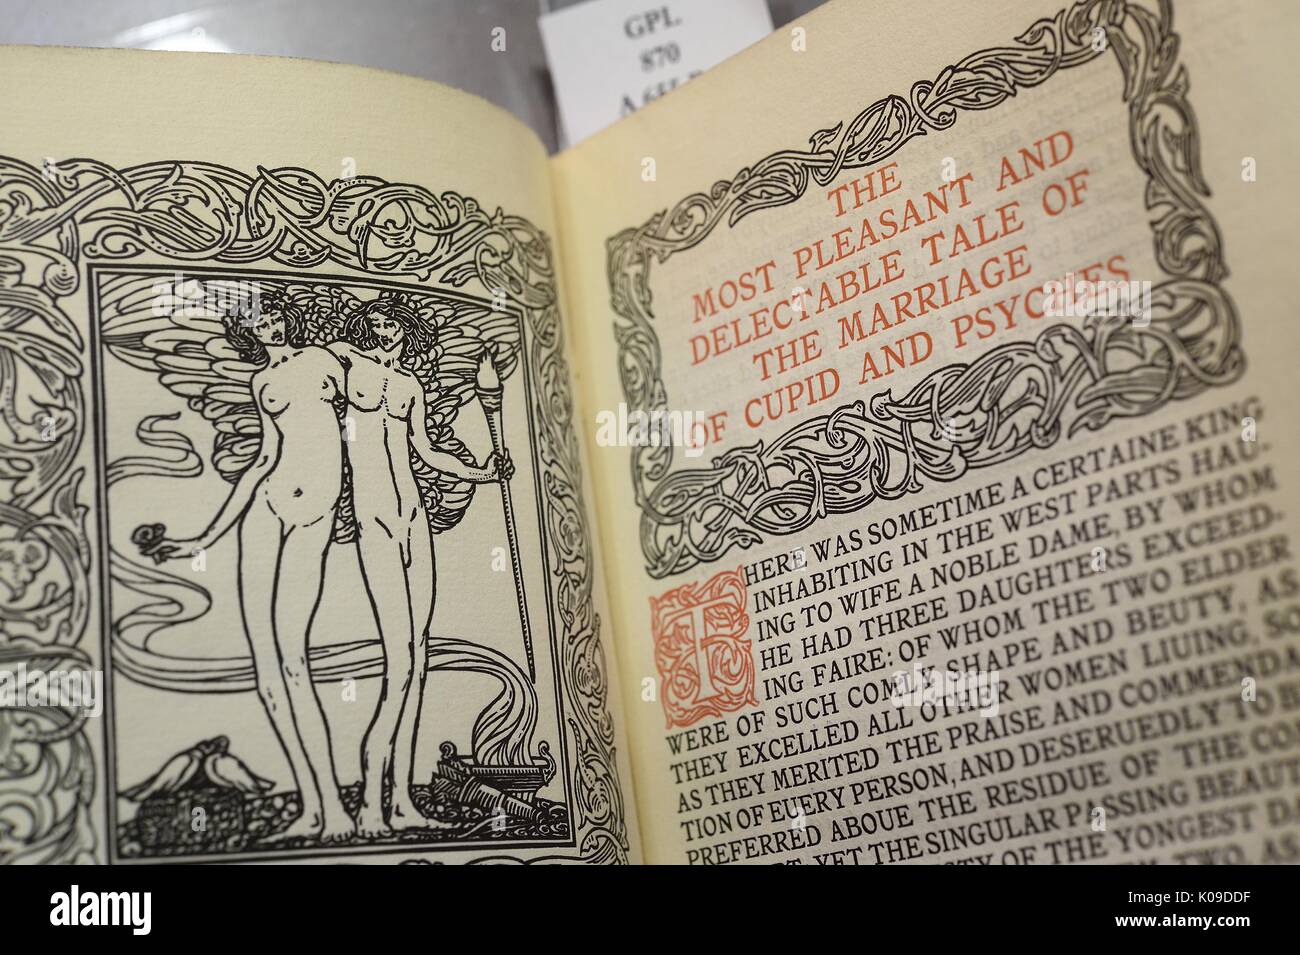 Photo of an open book, on one side is an illustration of Cupid and Psyches and on the other page is the title 'The Most Pleasant and Delectable Tale of The Marriage of Cupid and Psyches' and the beginning of the story, February 11, 2016. Stock Photo